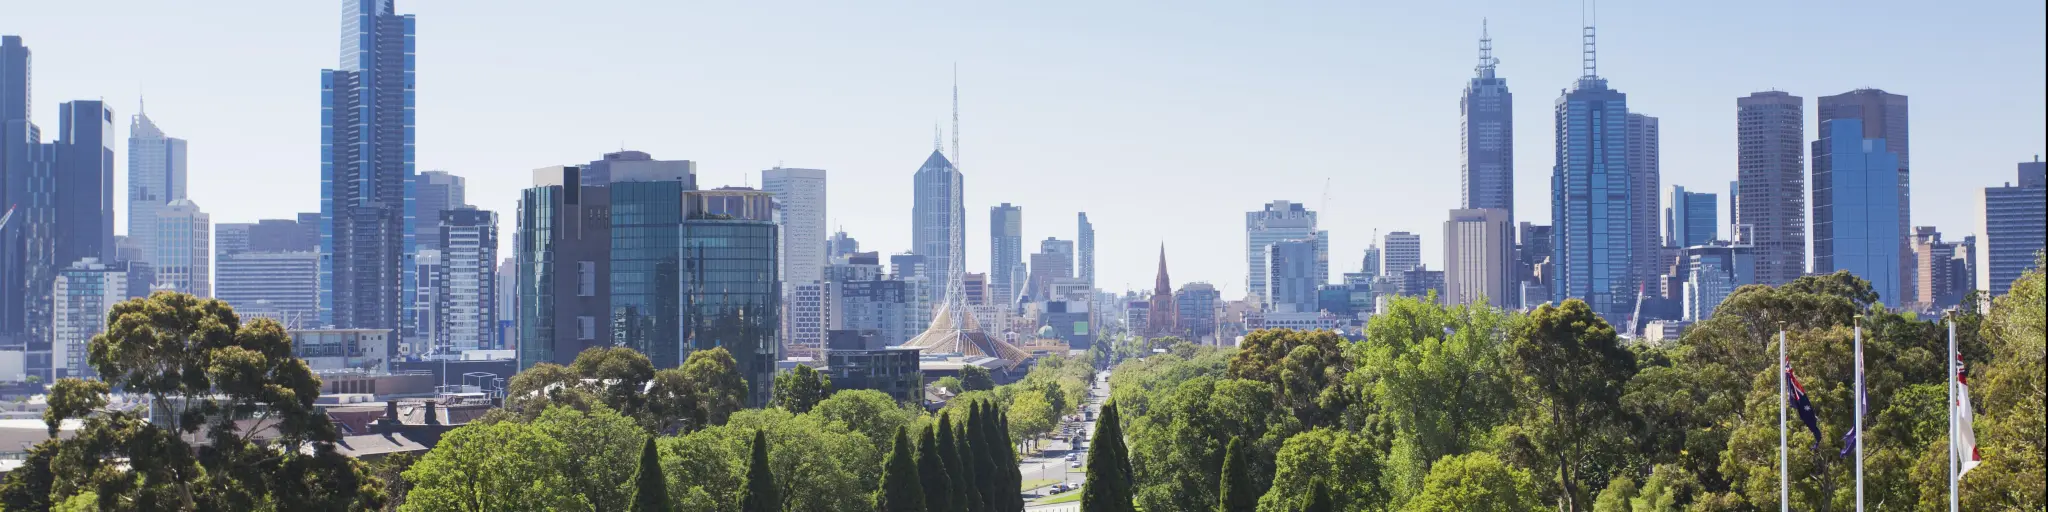 Melbourne, Australia with a view of the skyline on a sunny day.